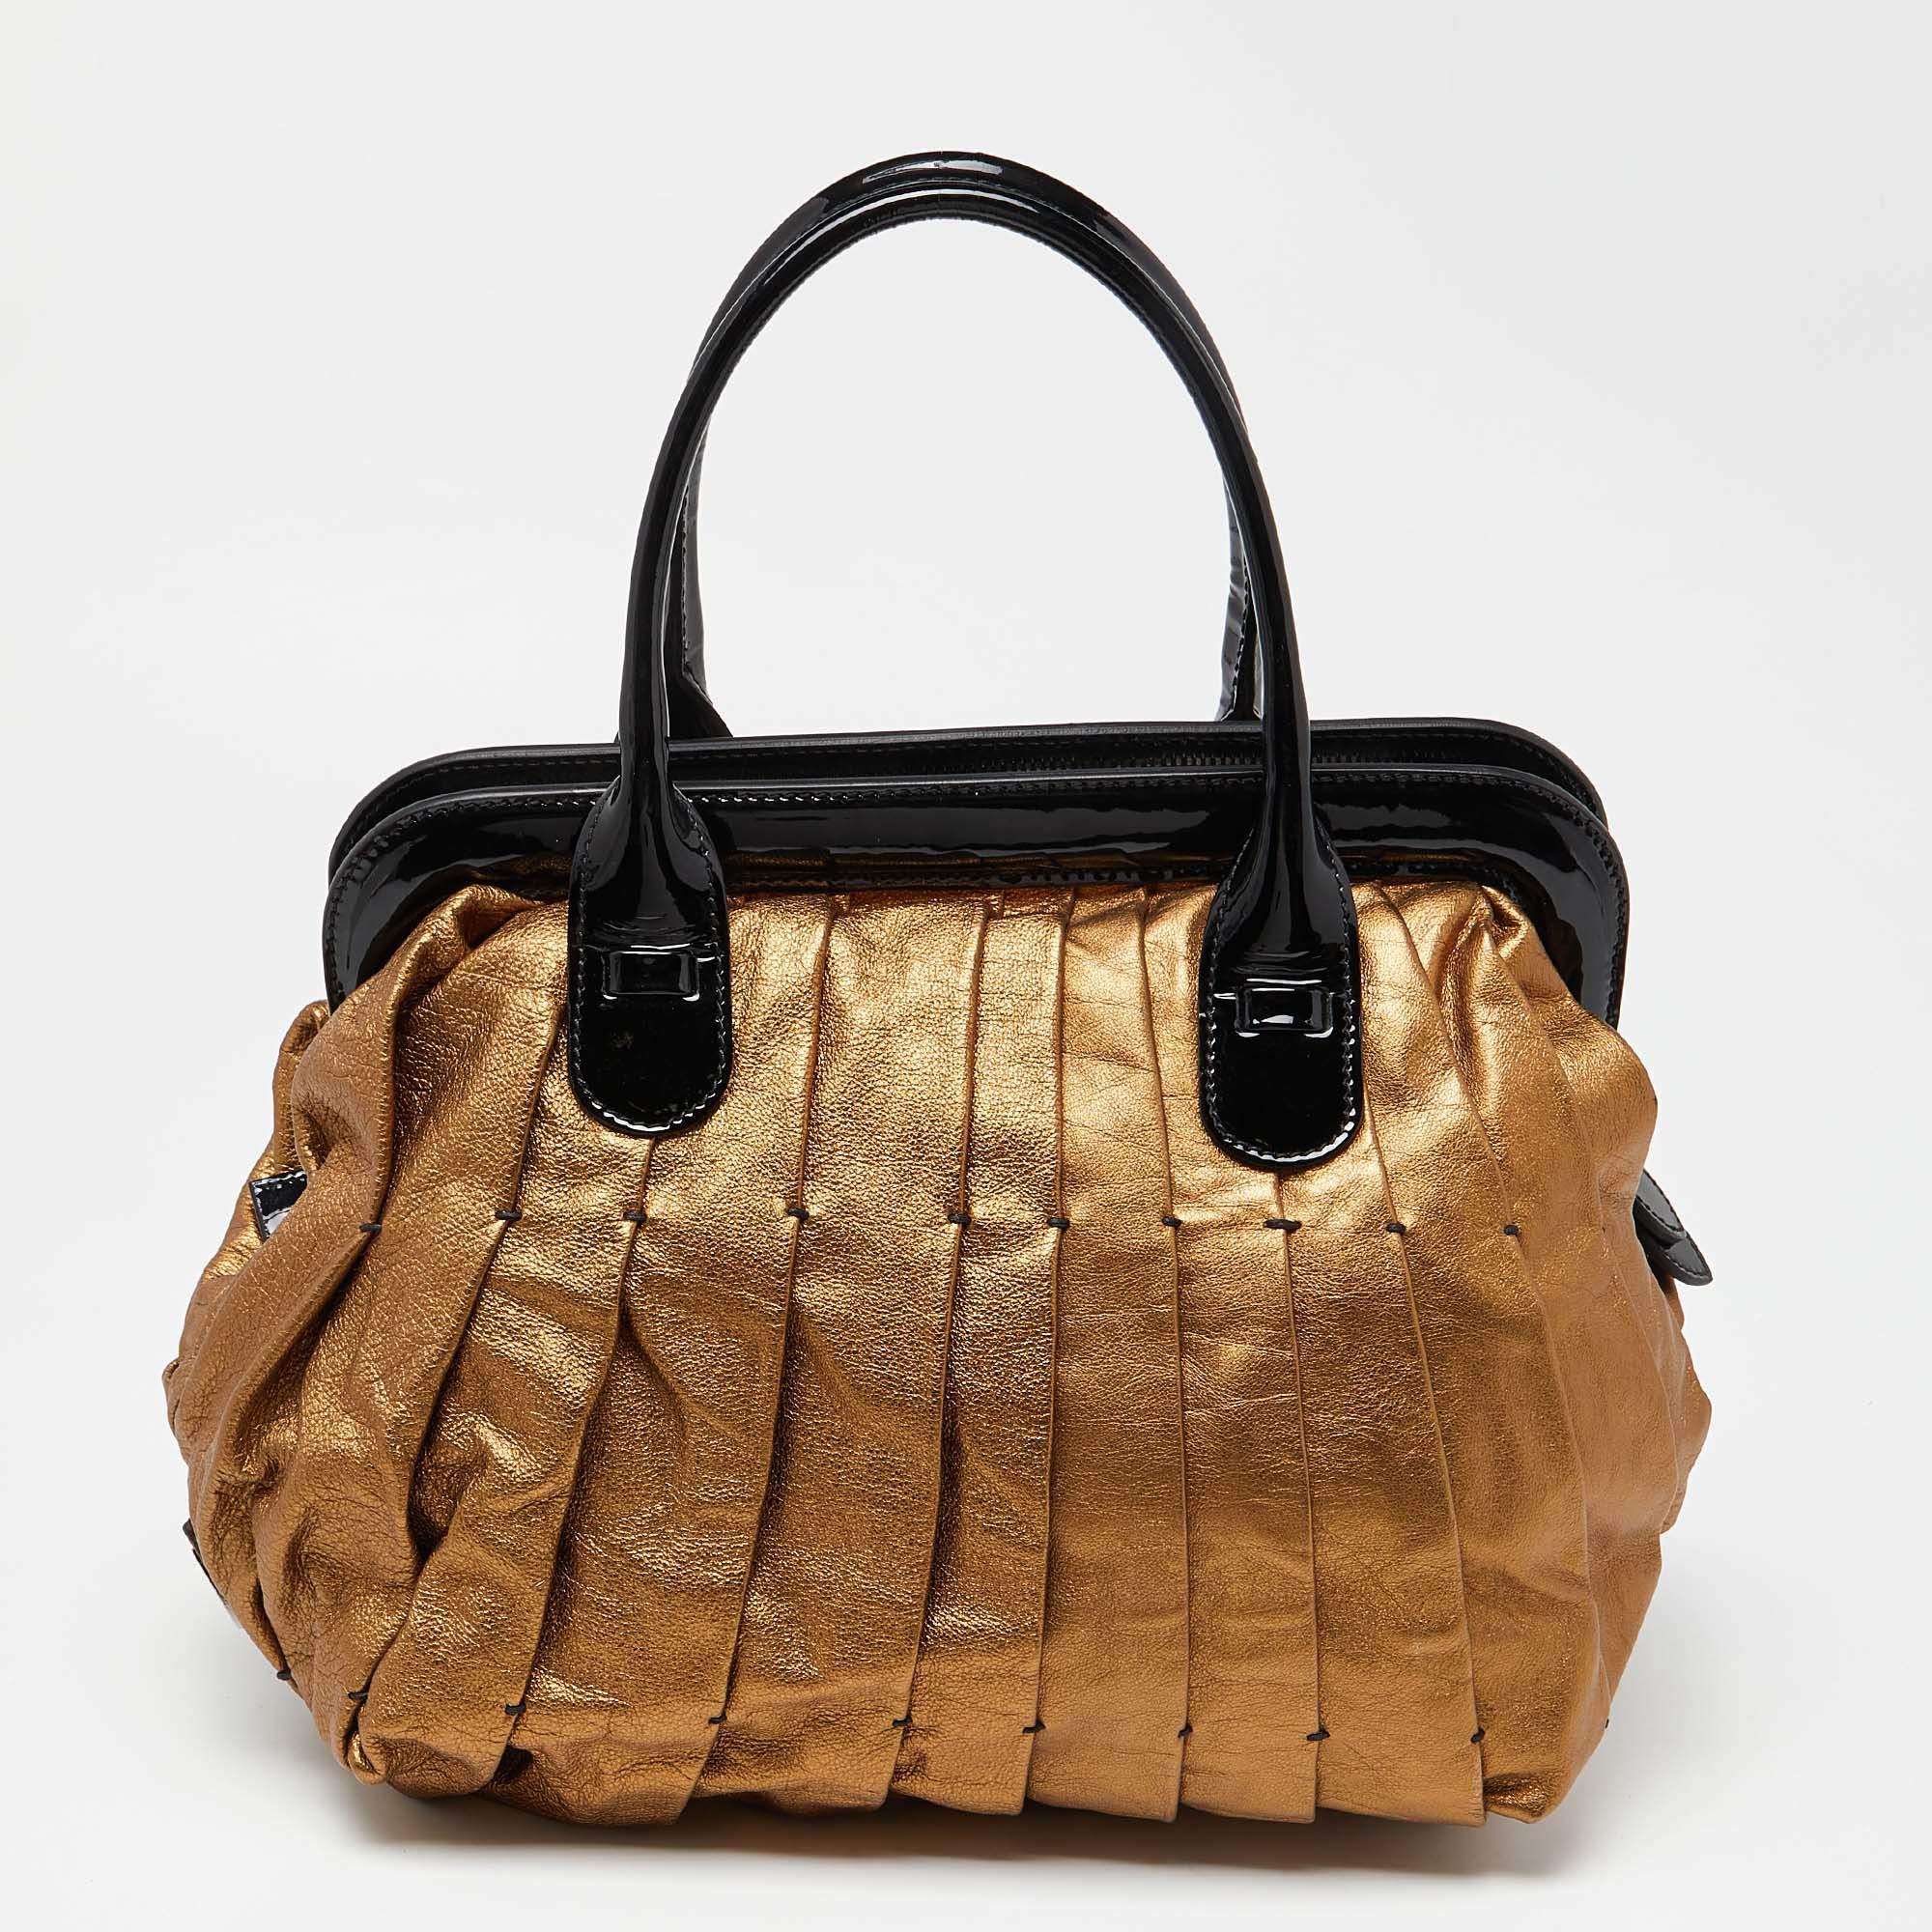 Valentino Gold/Black Pleated Patent Leather Satchel For Sale 3